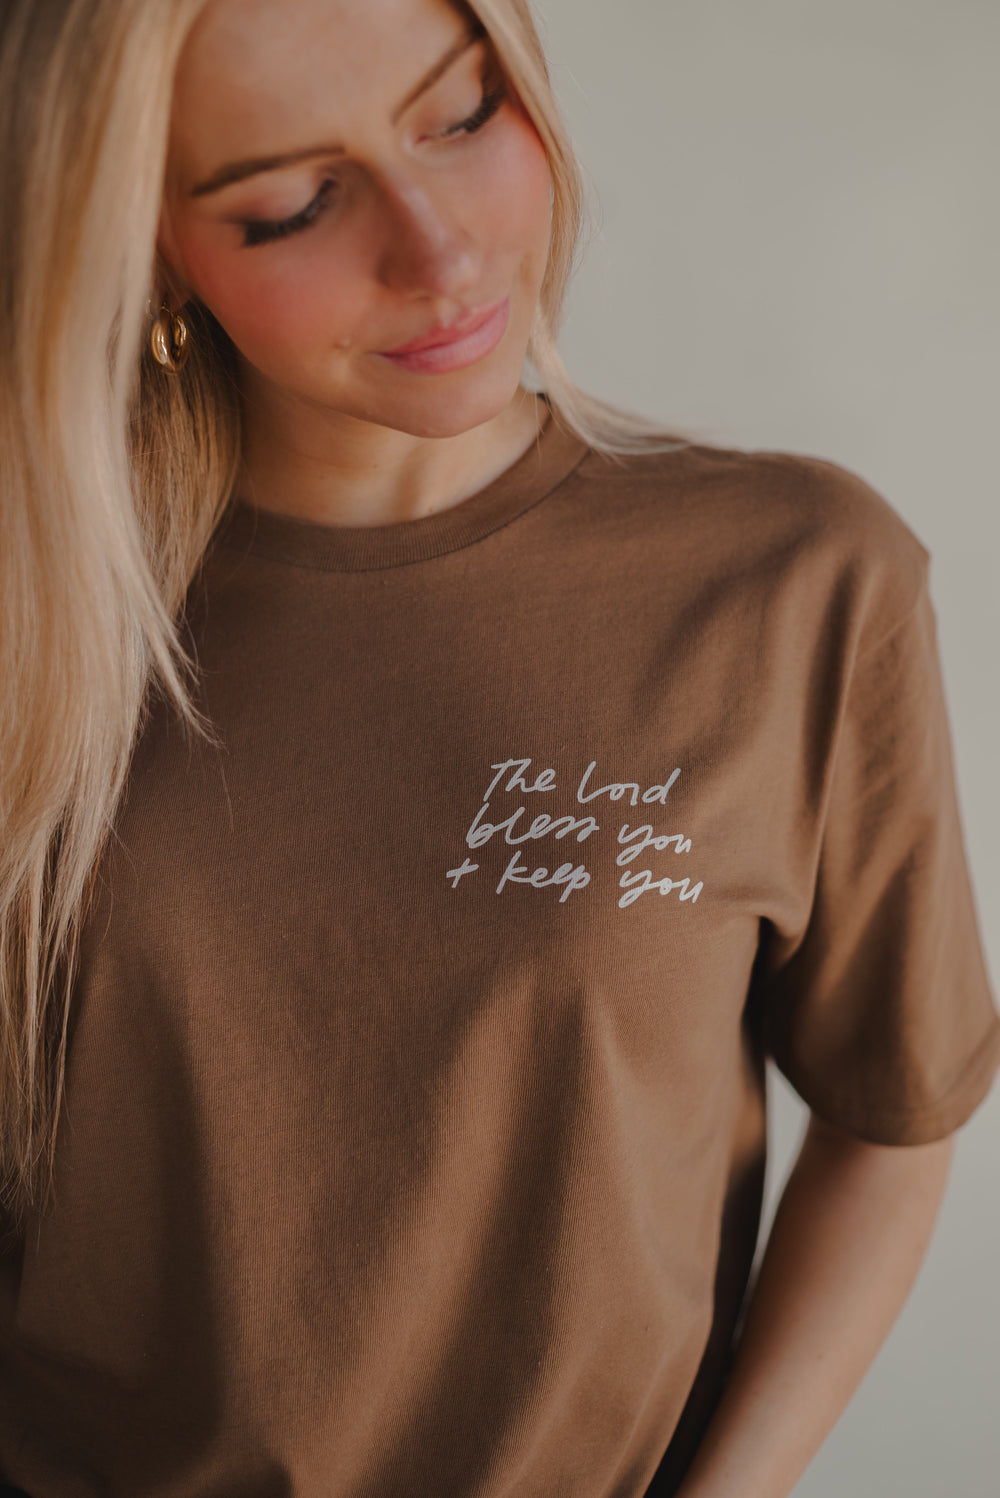 The Blessing Tee - Light Brown